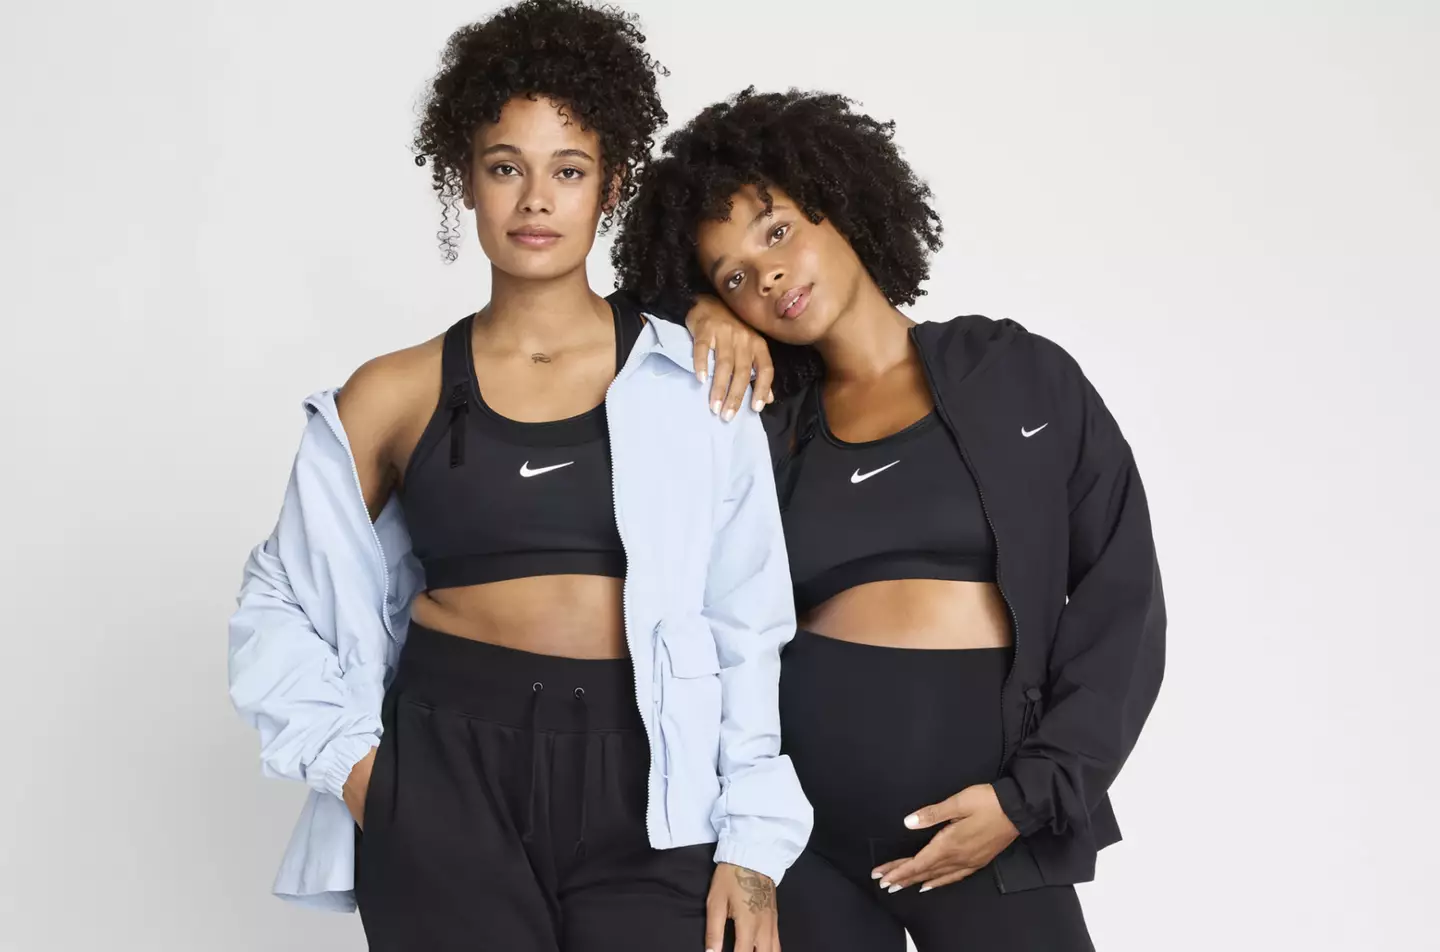 The new Nike (M) Swoosh Bra has many benefits all created for postpartum bodies and supporting mothers.